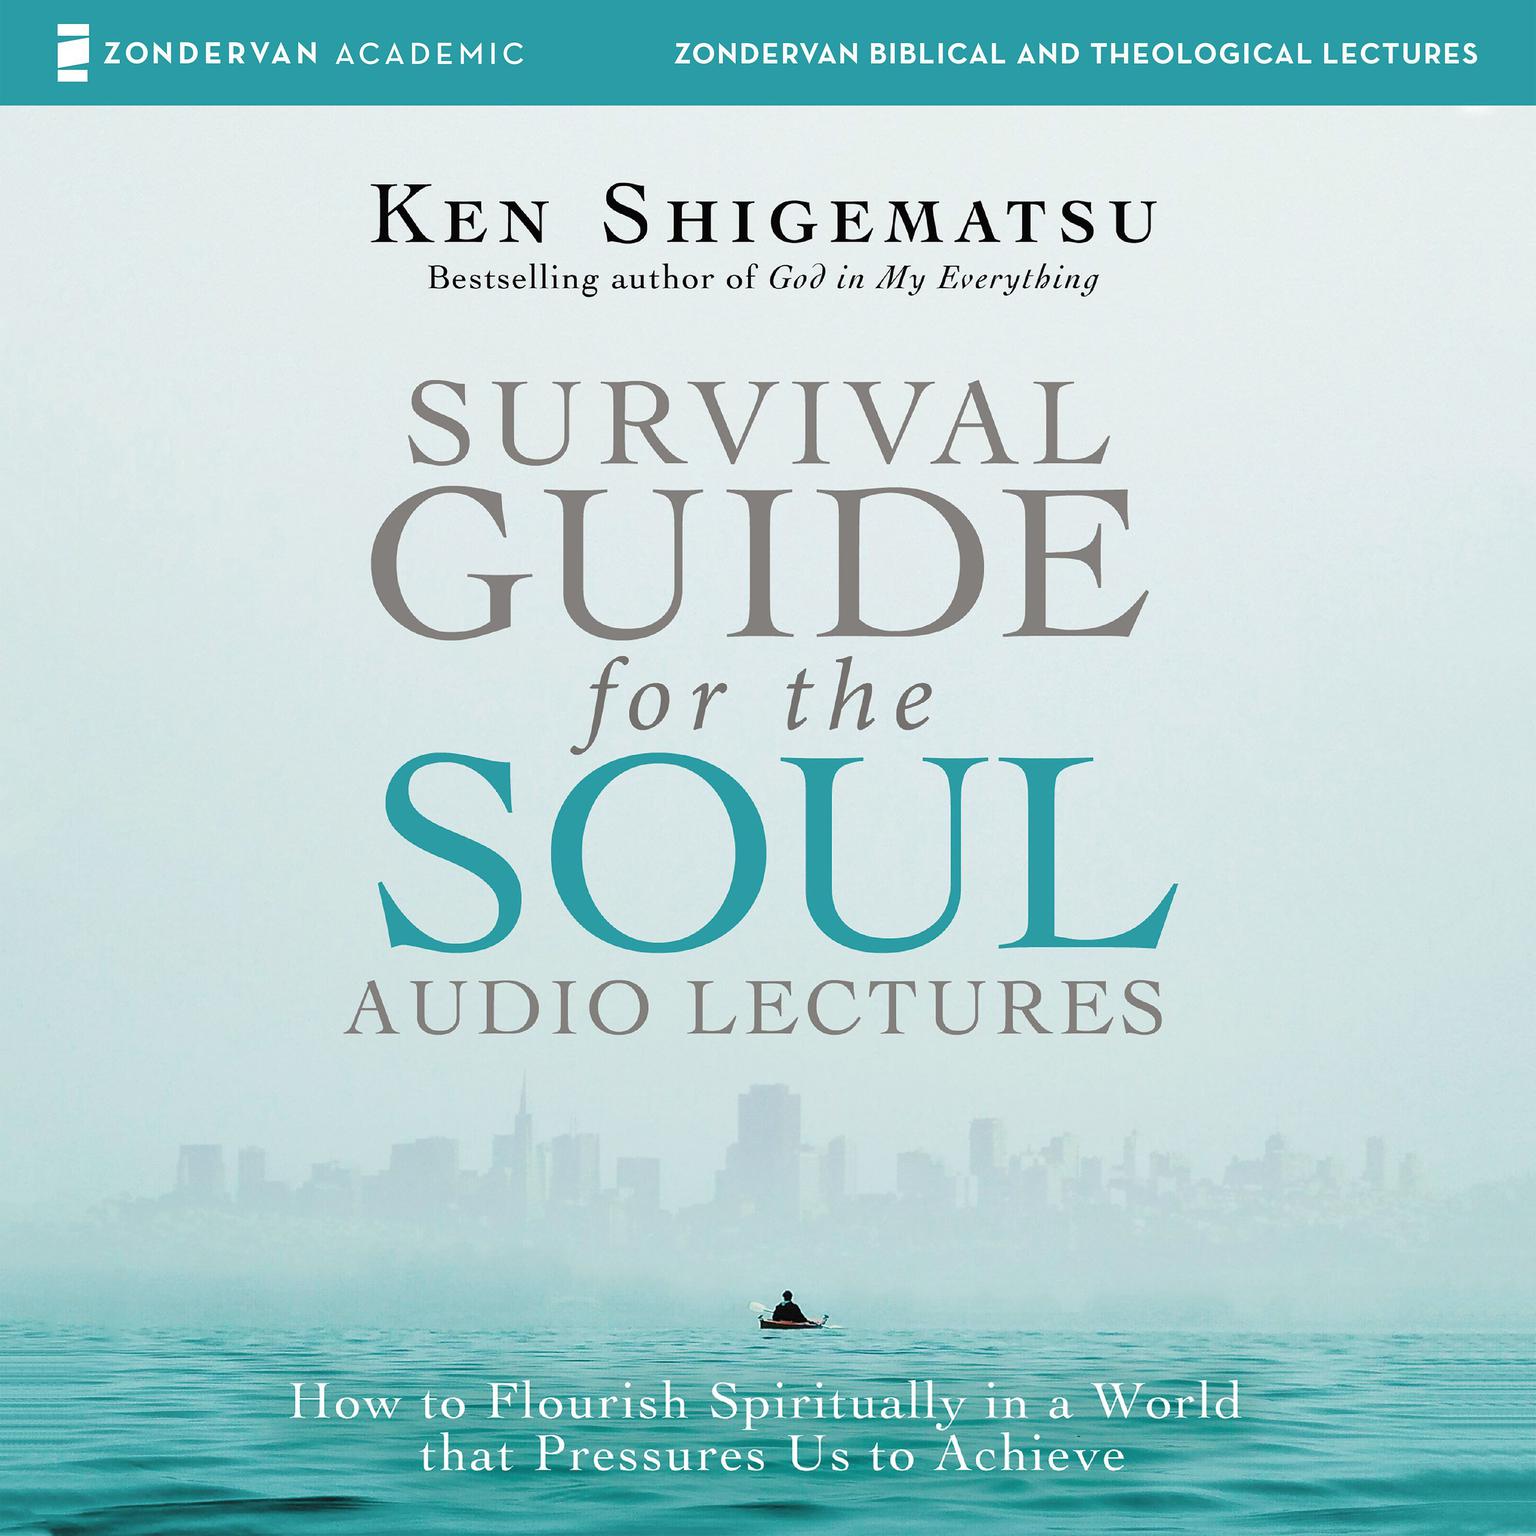 Survival Guide for the Soul: Audio Lectures: How to Flourish Spiritually in a World that Pressures Us to Achieve Audiobook, by Ken Shigematsu